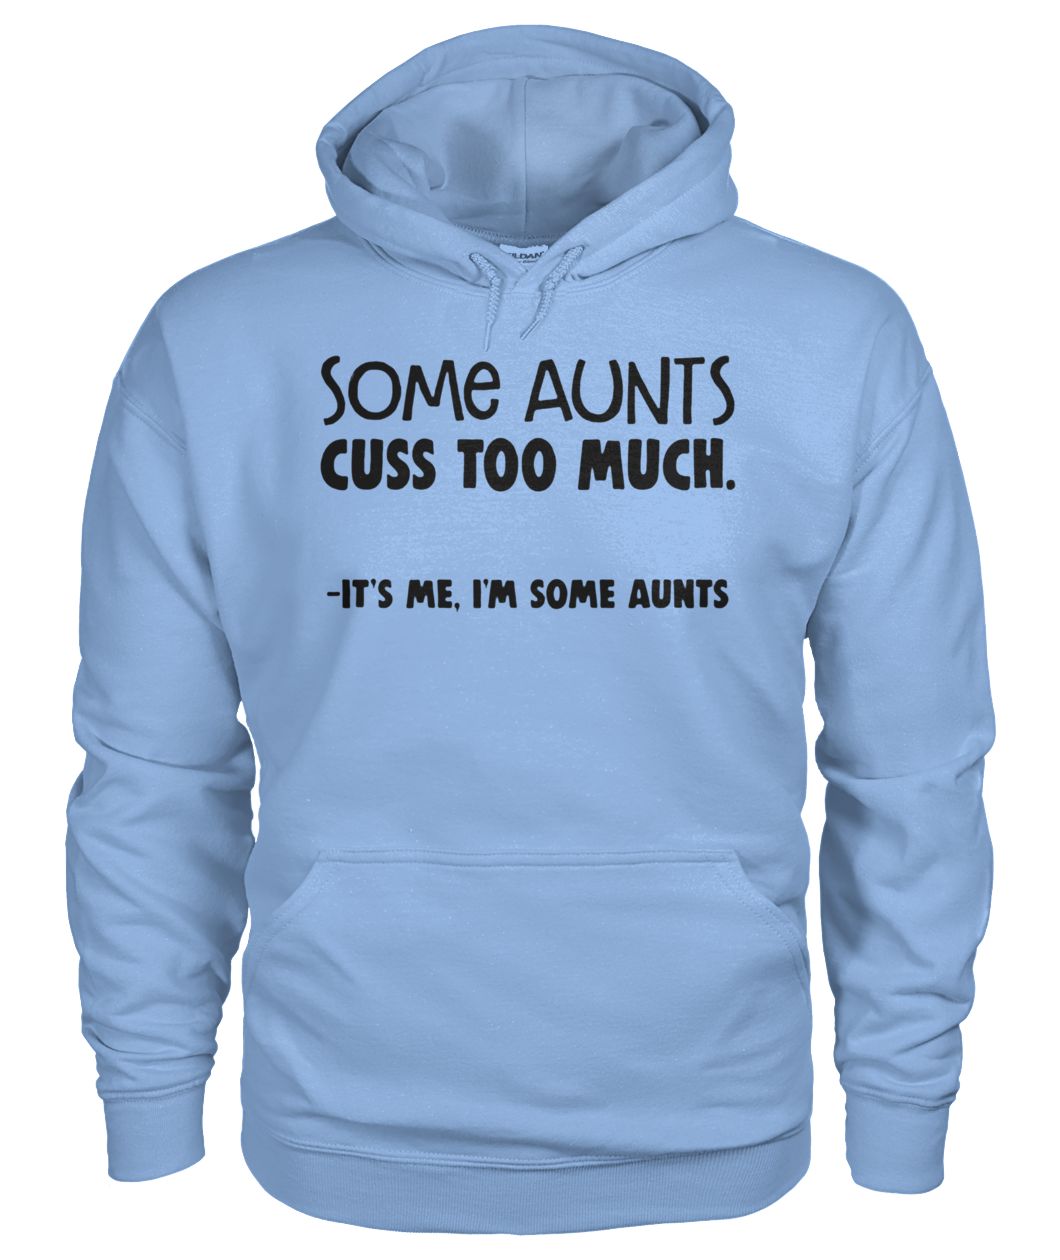 Some aunts cuss too much it's me I'm some aunts gildan hoodie